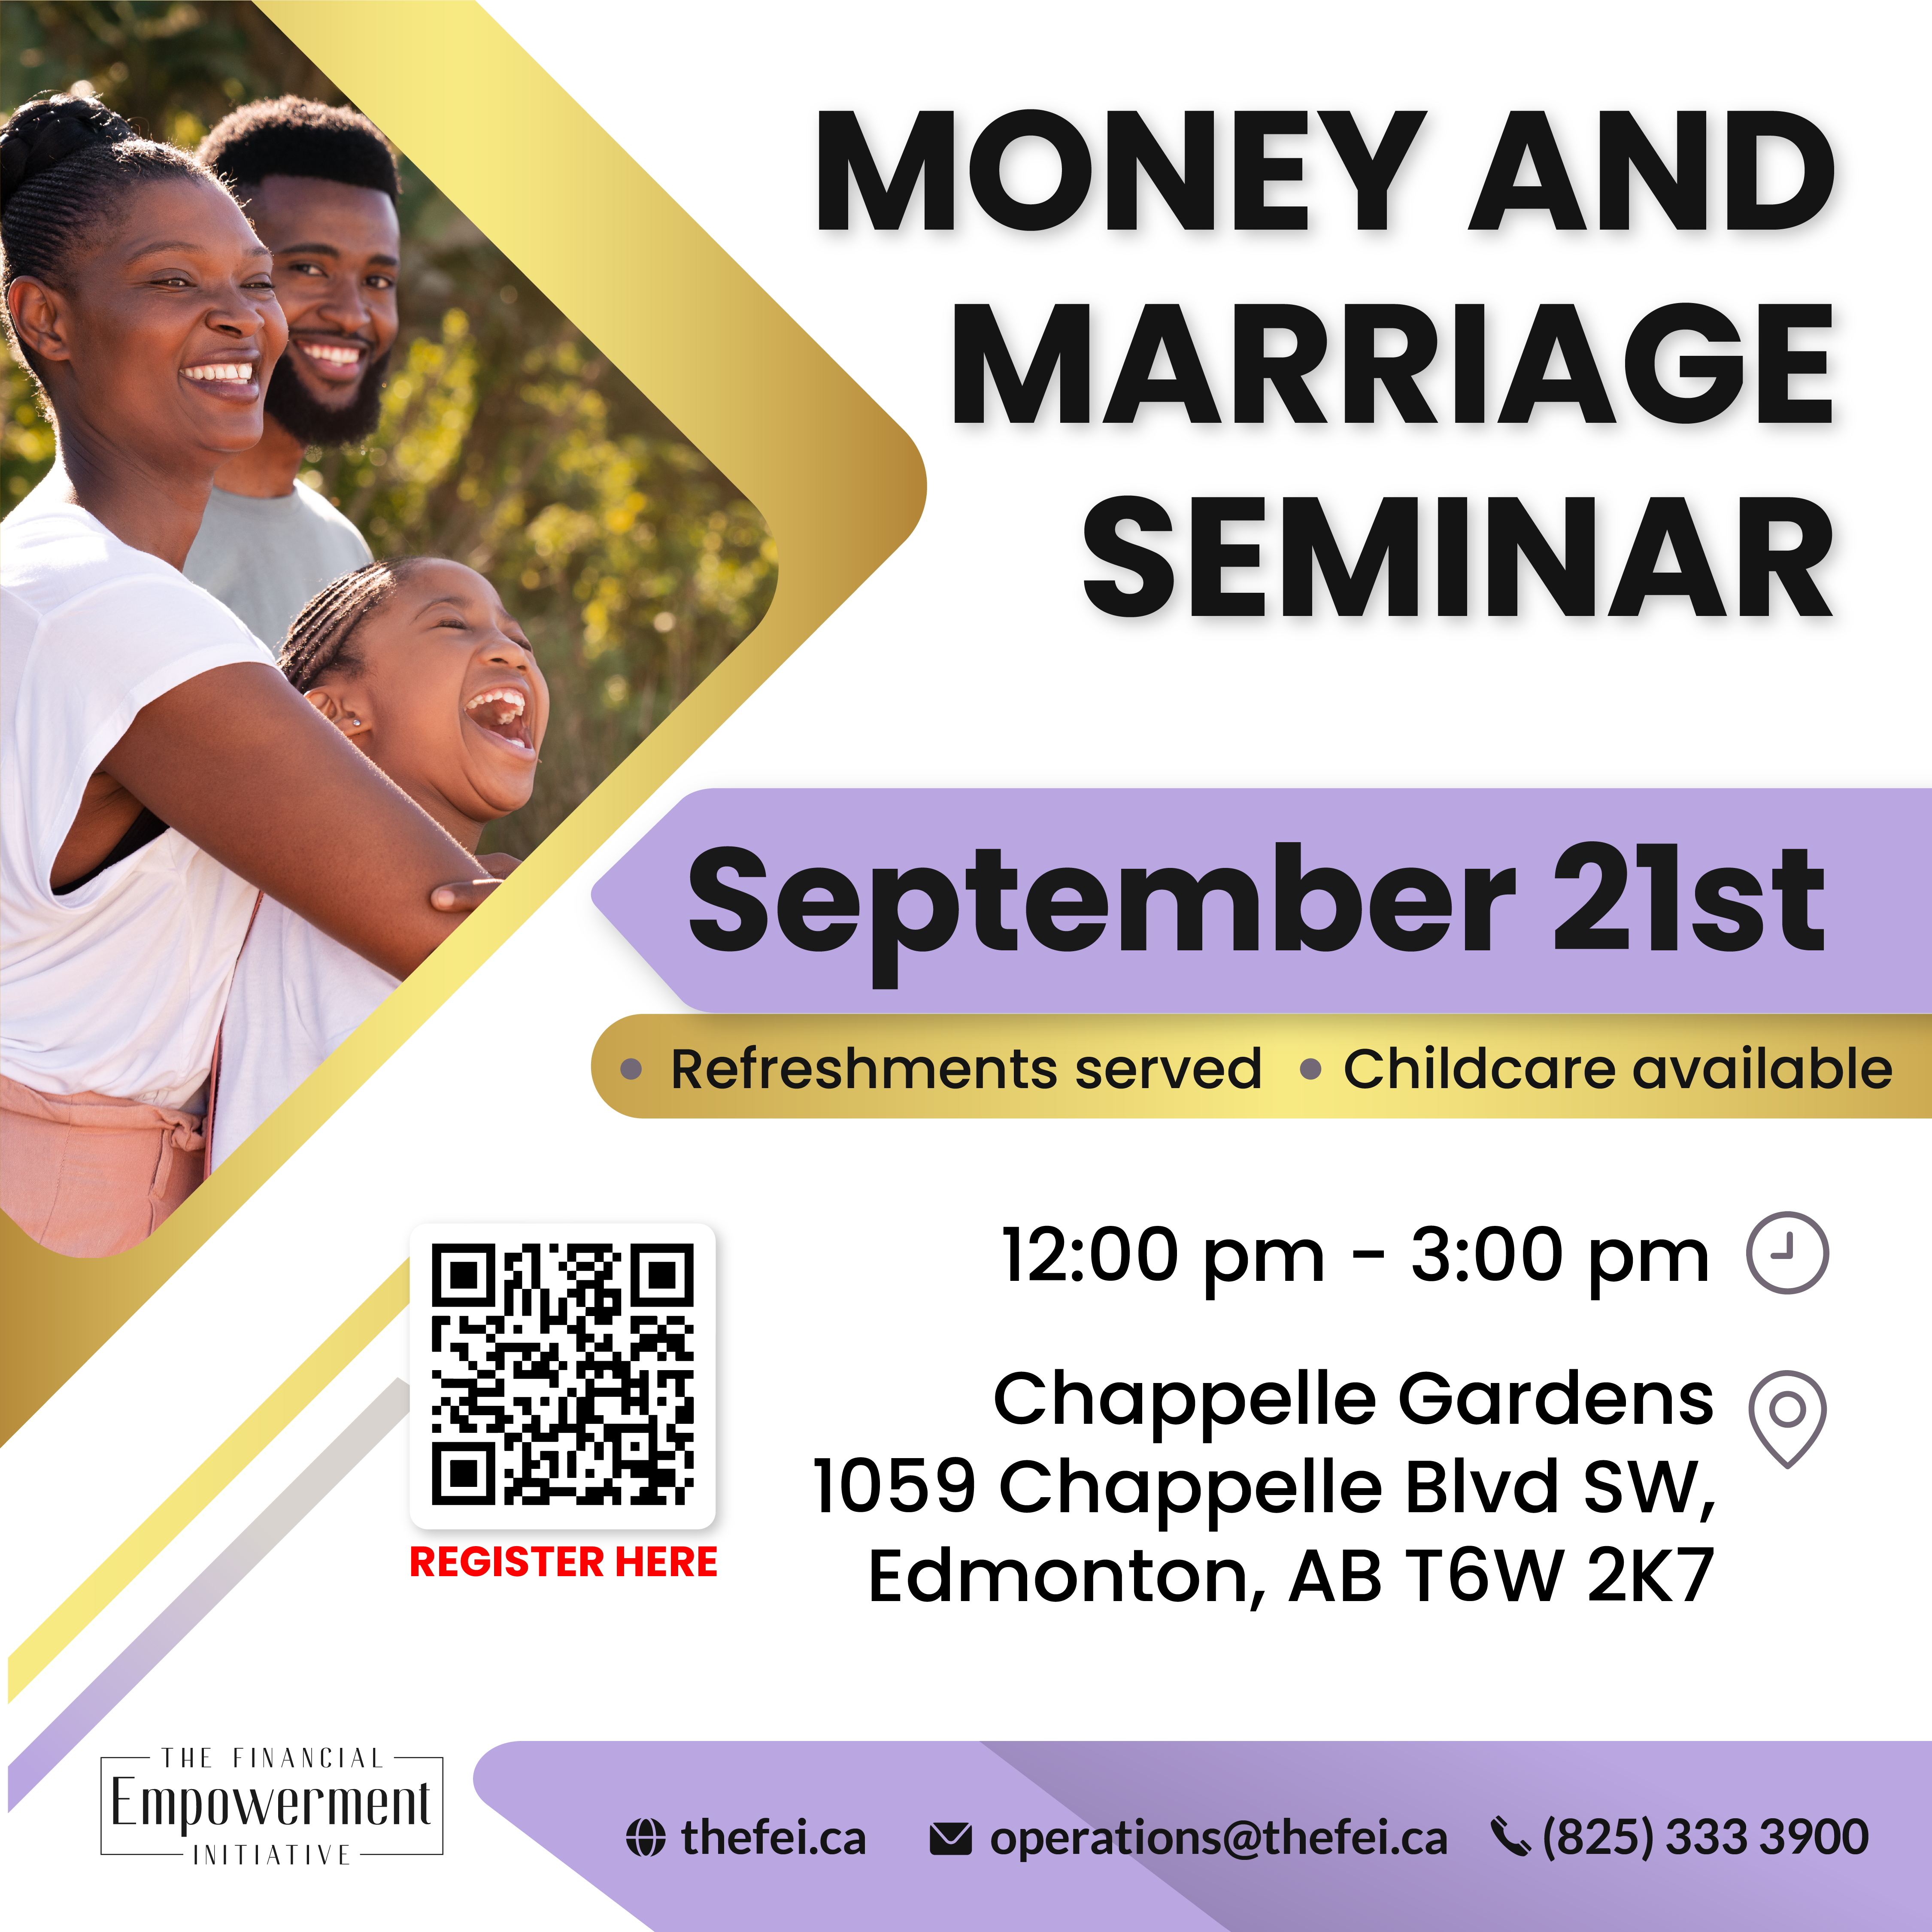 Join us for the Money and Marriage Seminar, hosted by The Financial Empowerment Initiative, on September 21st at Chappelle Gardens, Edmonton. This insightful event will run from 12:00 p.m. to 3:00 p.m. and offer valuable strategies to enhance financial management within marriage.